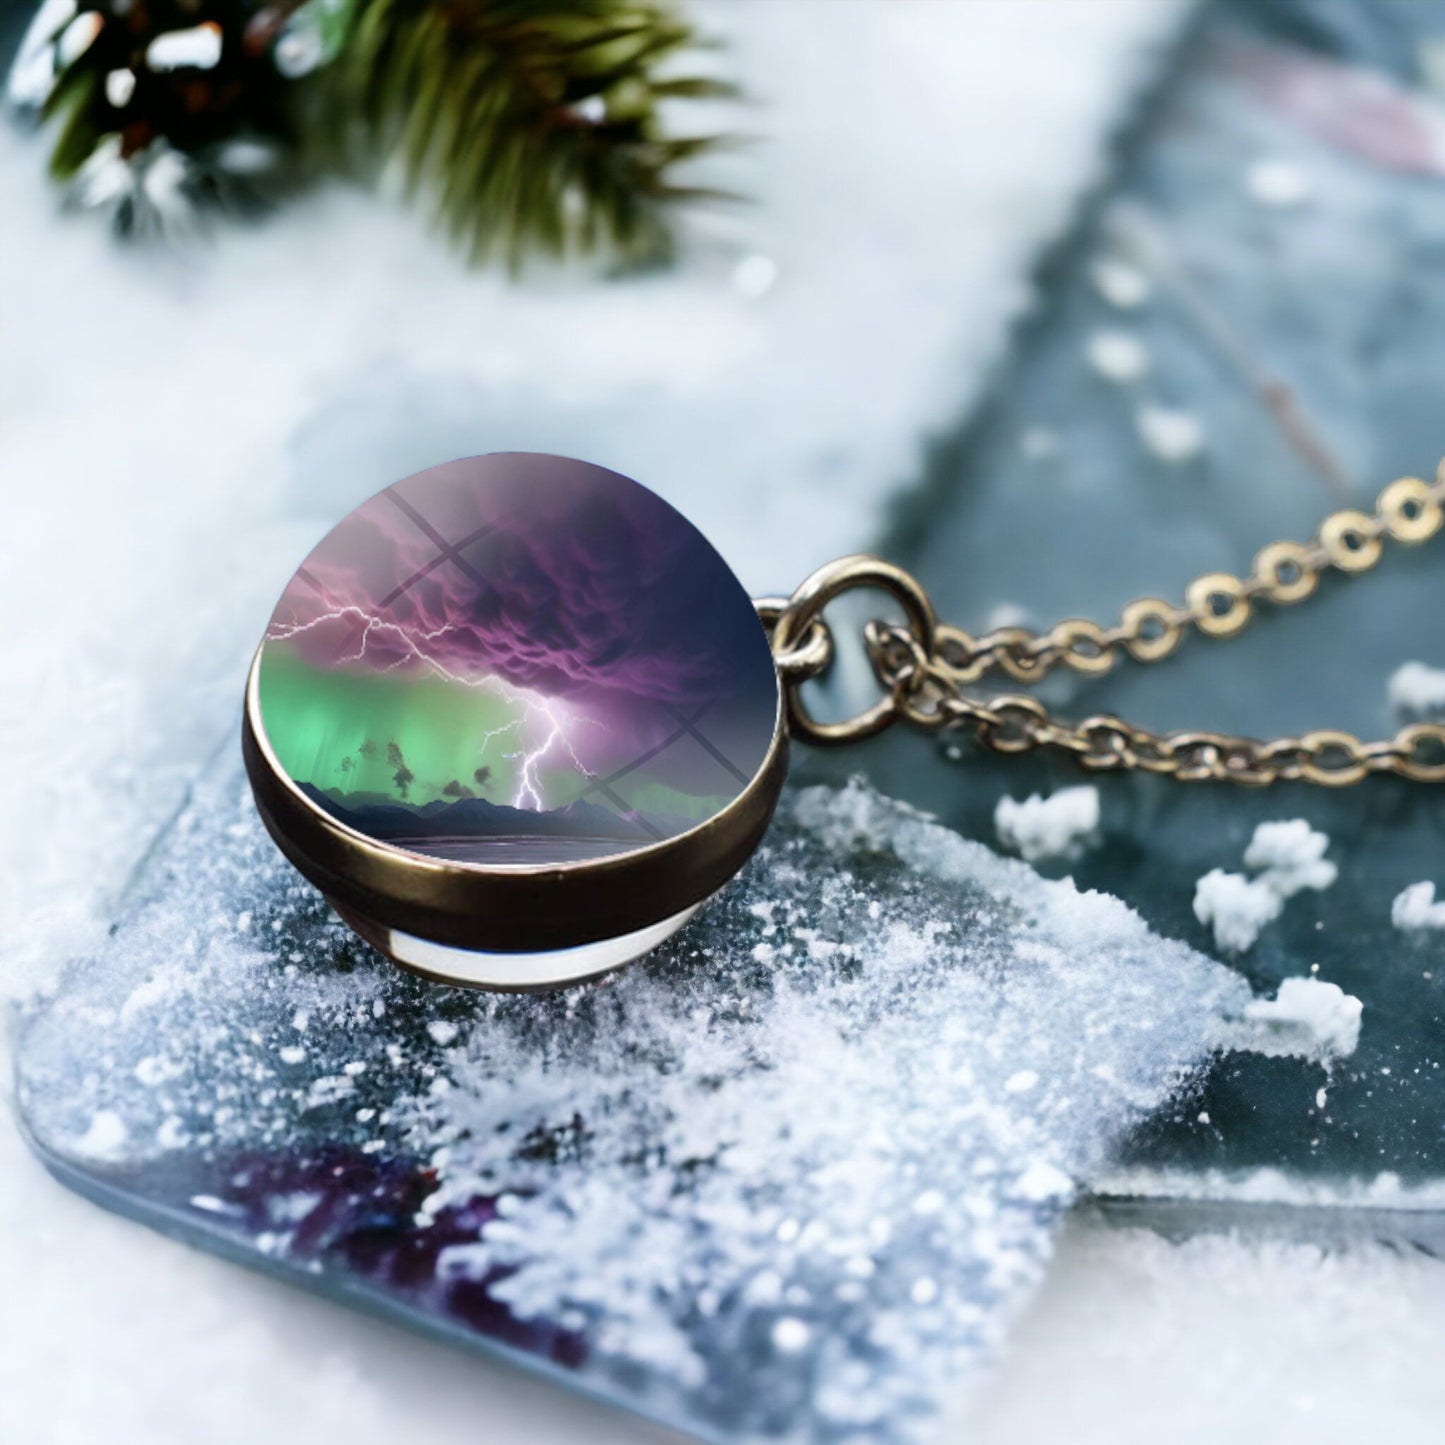 Unique Aurora Borealis Silver Necklace - Northern Light Jewelry - Double Side Glass Ball Pendent Necklace - Perfect Aurora Lovers Gift 26